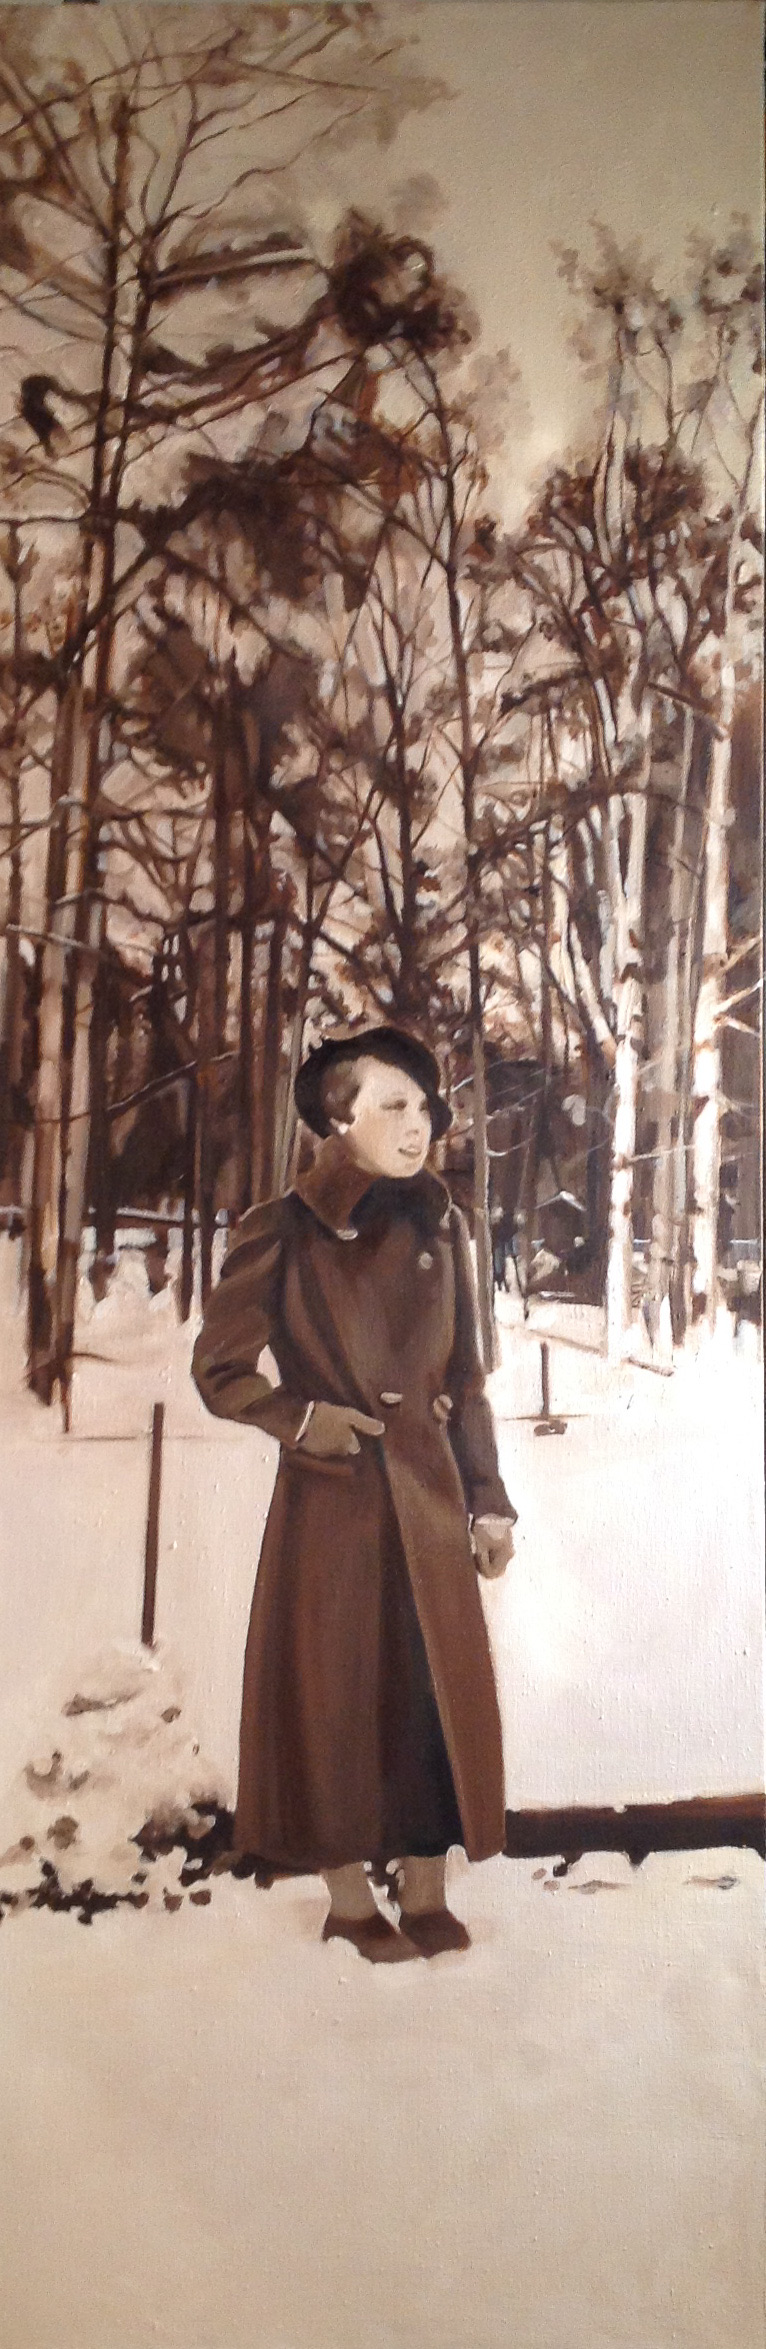 Esther, 2013, Oil on linen, 60" x 20",  Collection of Bente Hierholzer